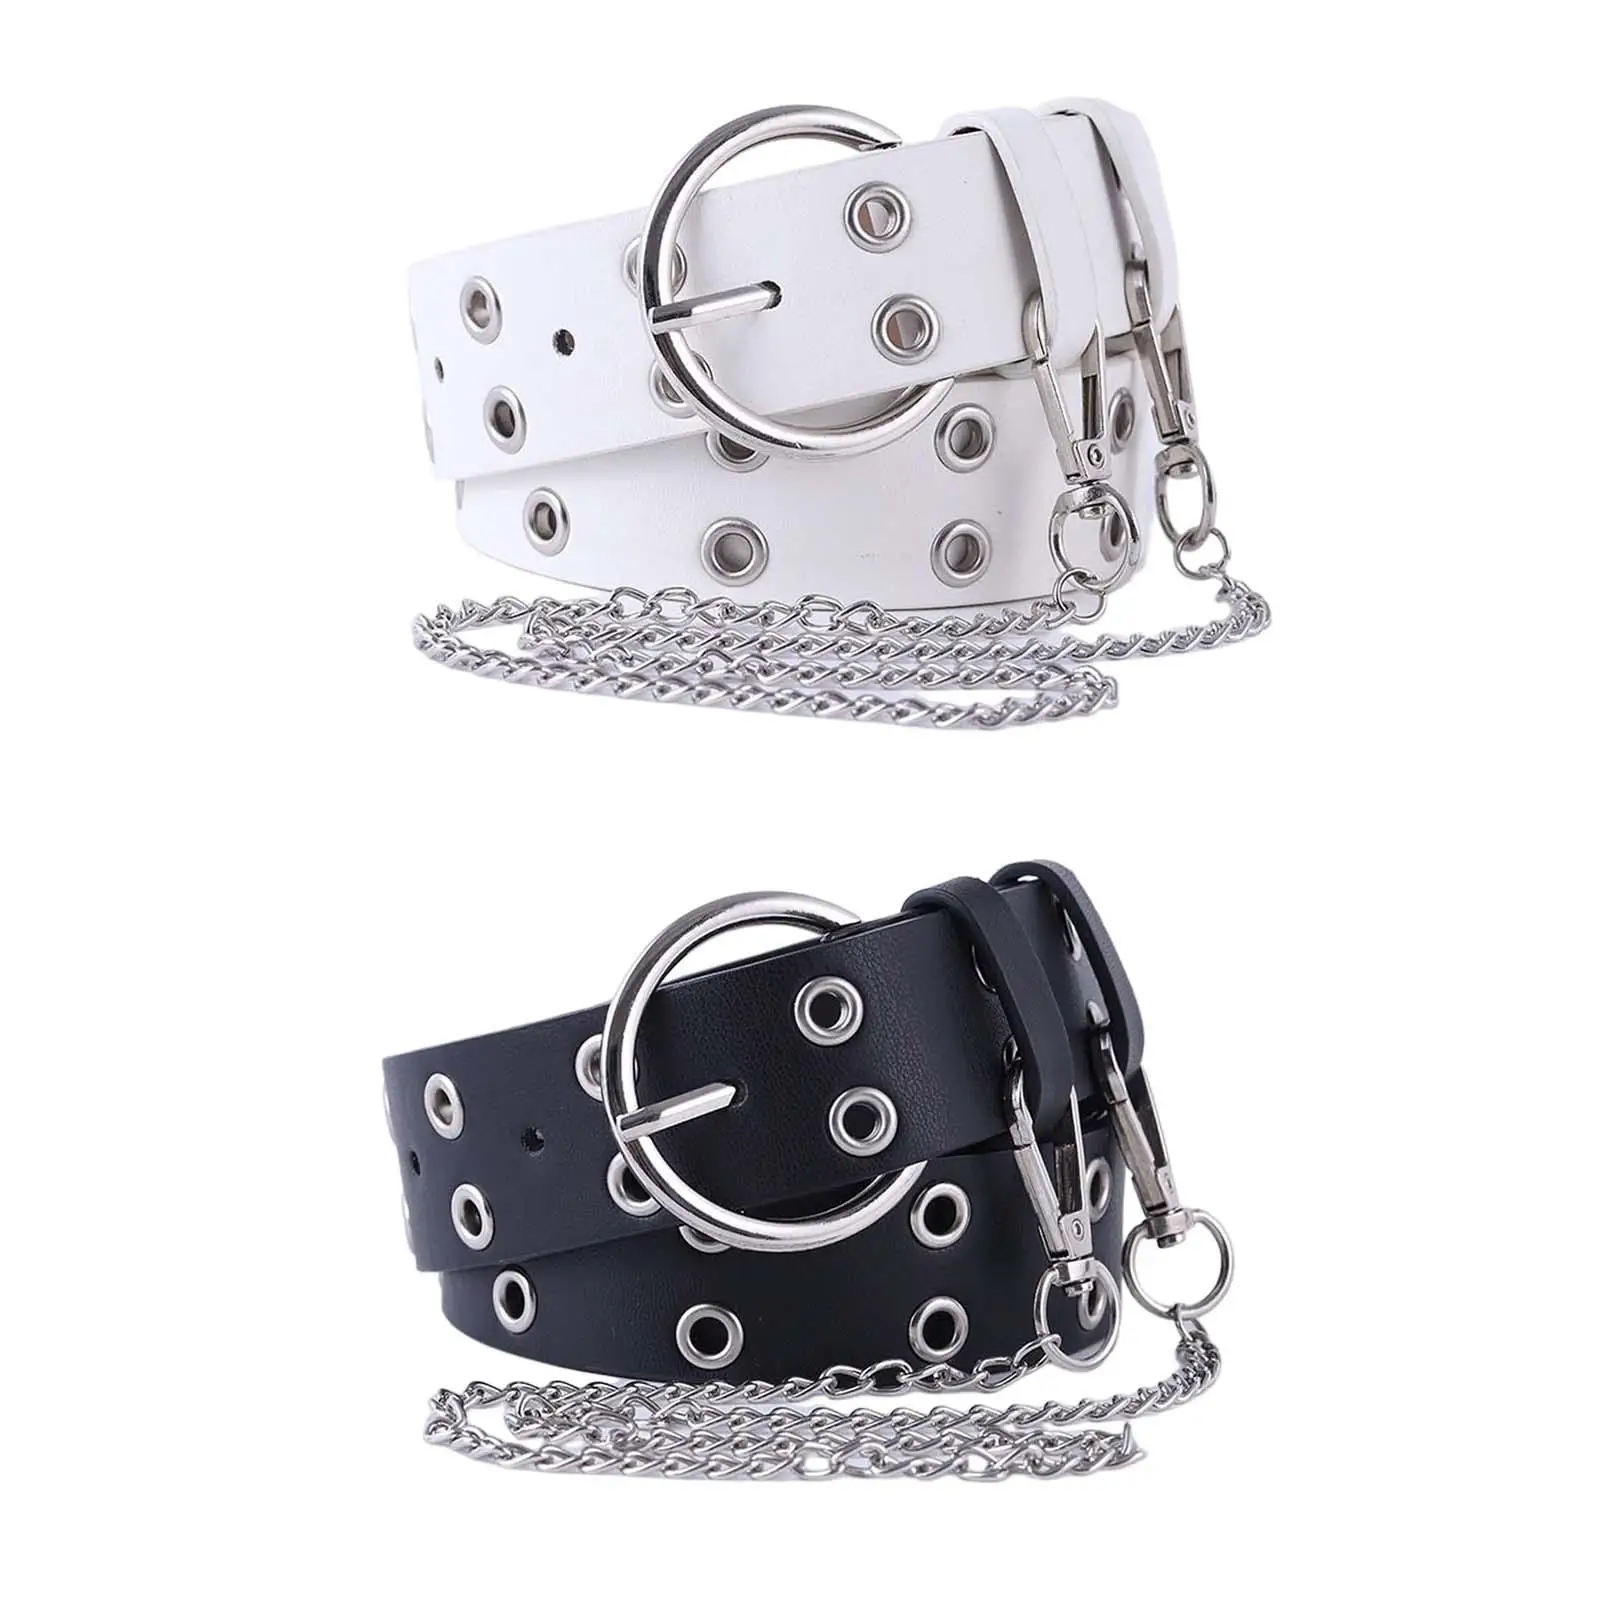 Women Punk Chain Belt Ladies Adjustable Double Row Hole Eyelet Jeans Gothic Decor Waistband with Chain Decorative Belts